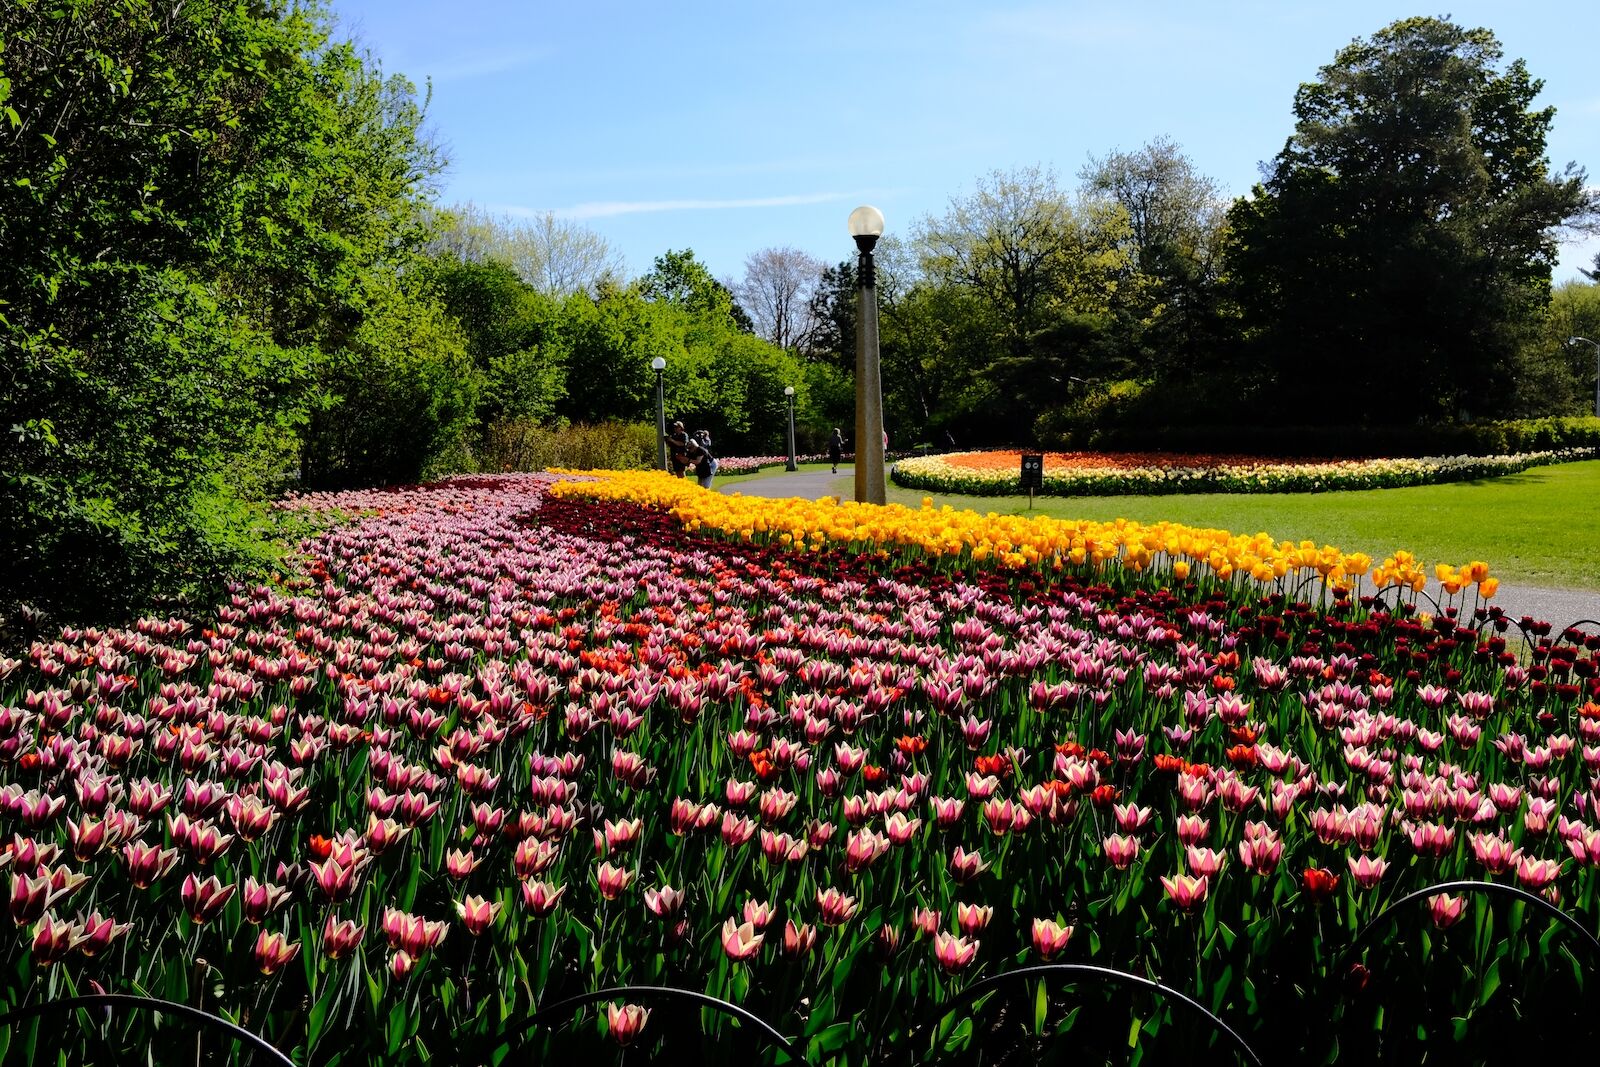 Park in Ottawa filled with tulip blooms during the Canadian Tulip festival